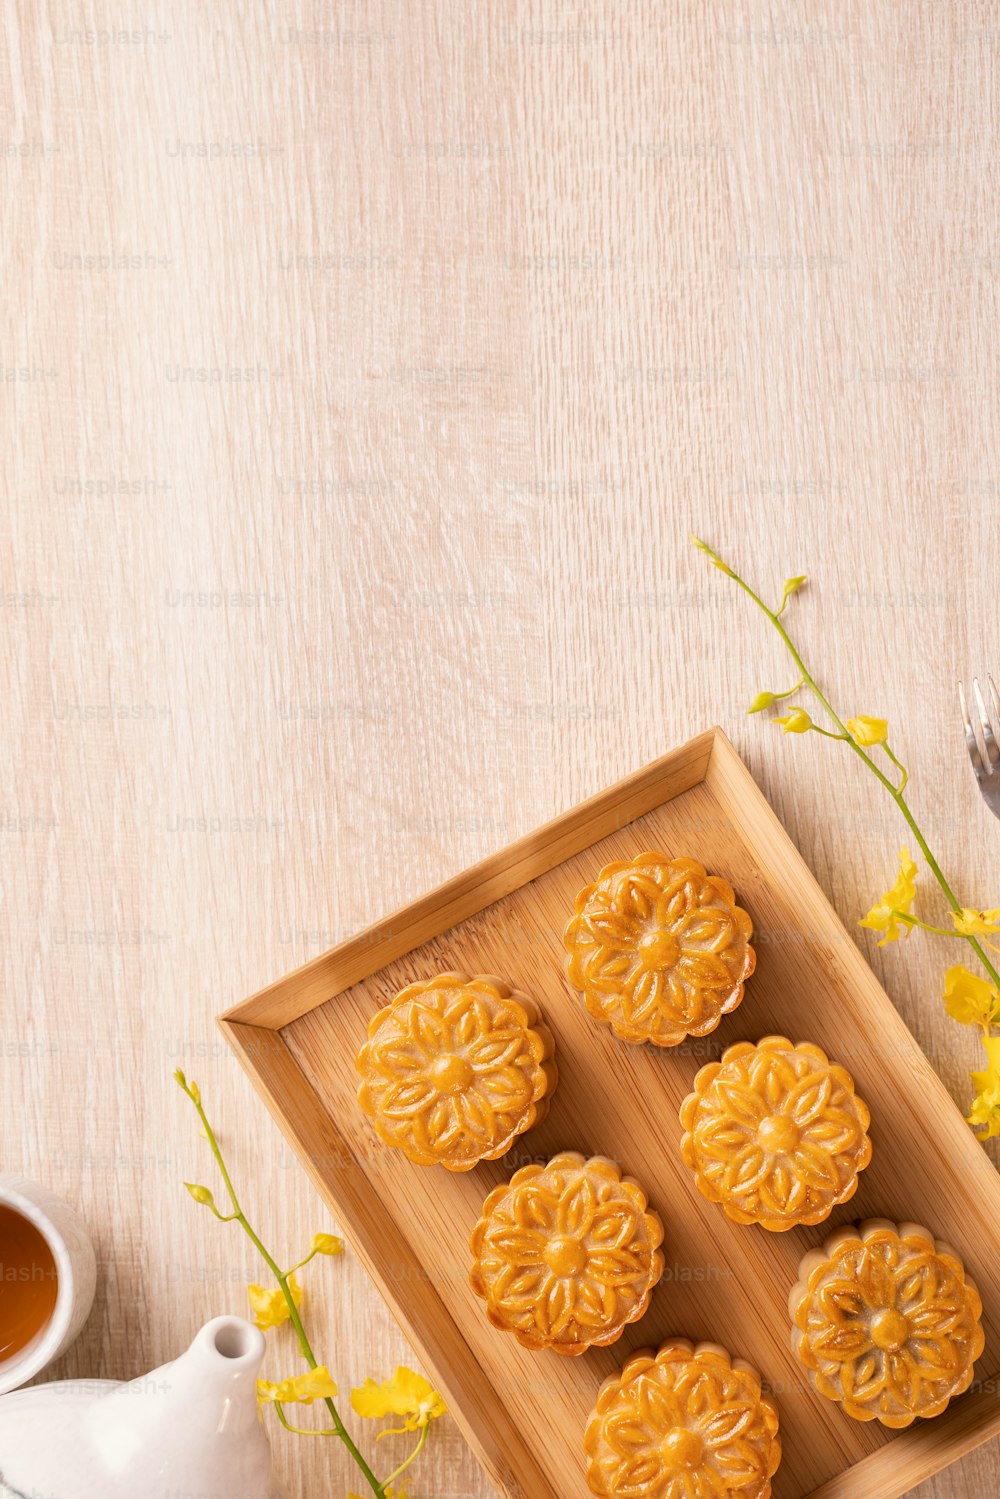 Moon cakes with tea on bright wooden table, holiday concept of Mid-Autumn festival traditional food layout design, top view, flat lay, copy space.